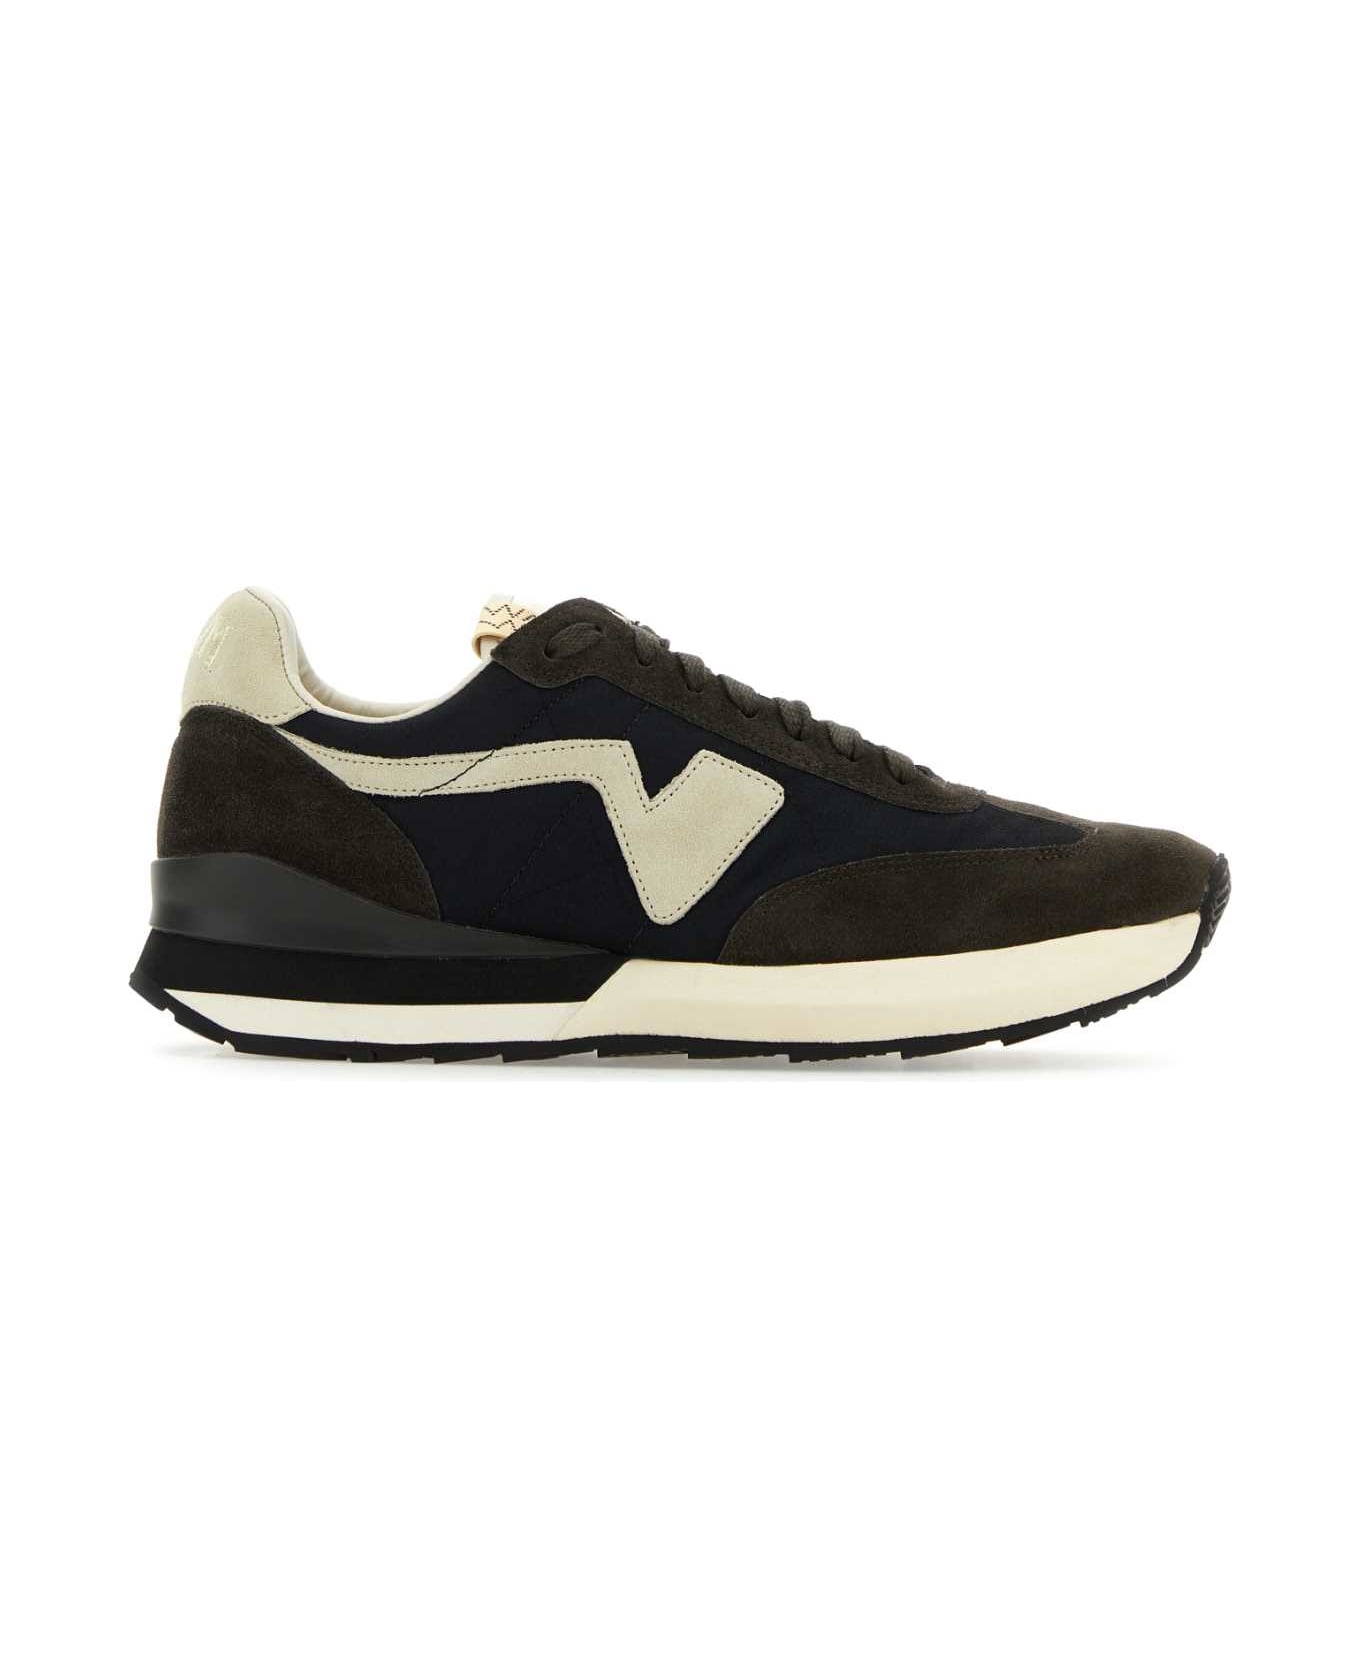 Visvim Multicolor Fabric And Suede Dunand Trainer Sneakers - BLACK スニーカー